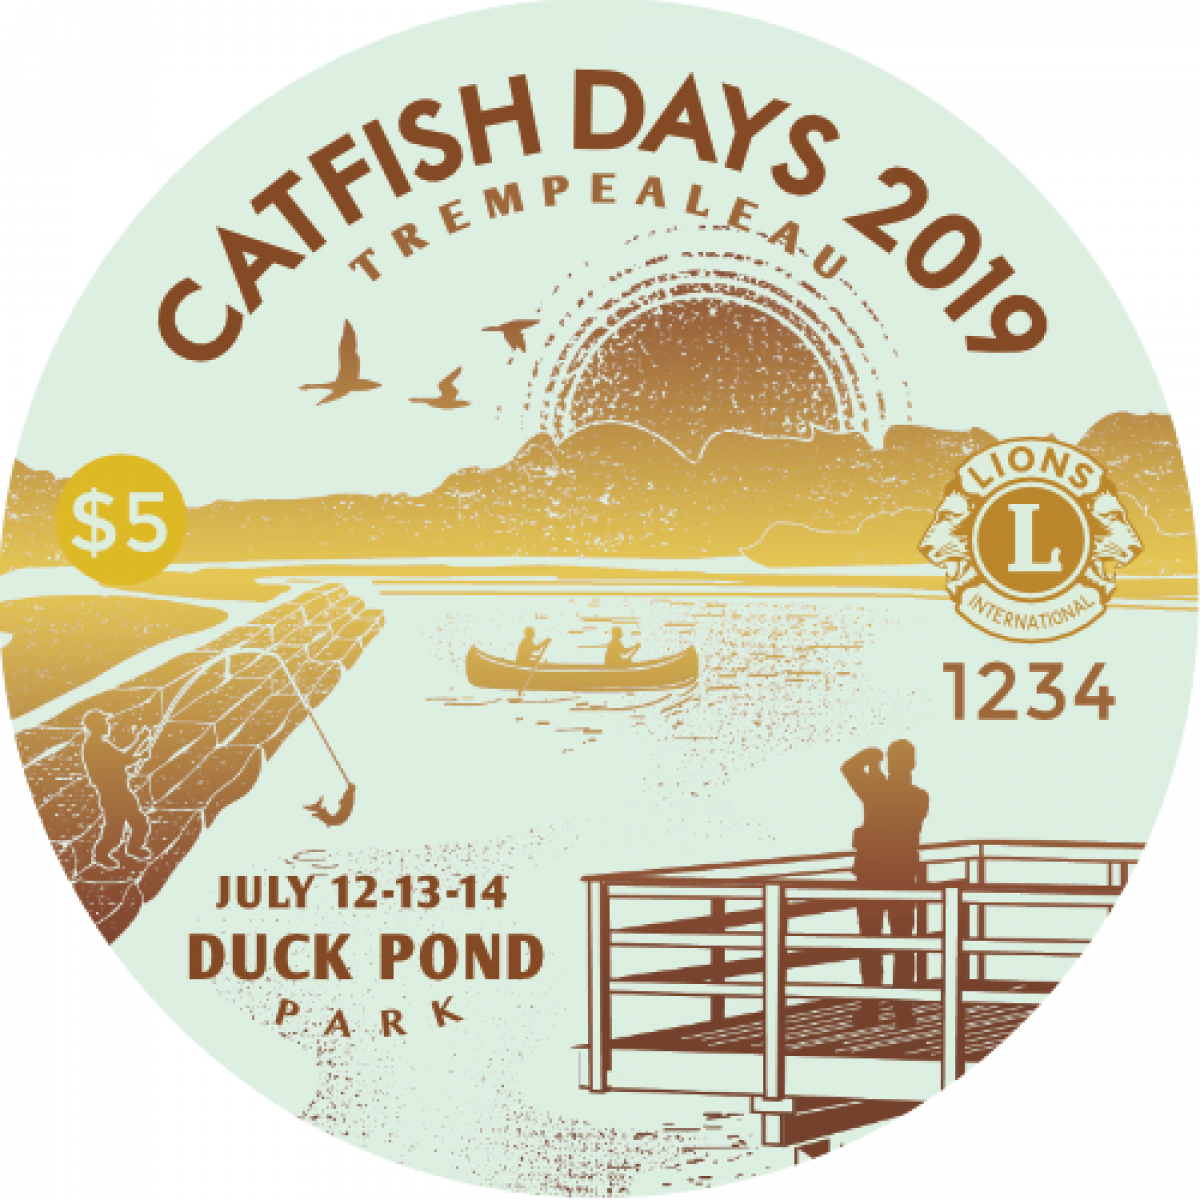 Catfish Days 2019 Trempealeau Chamber of Commerce and Tourism